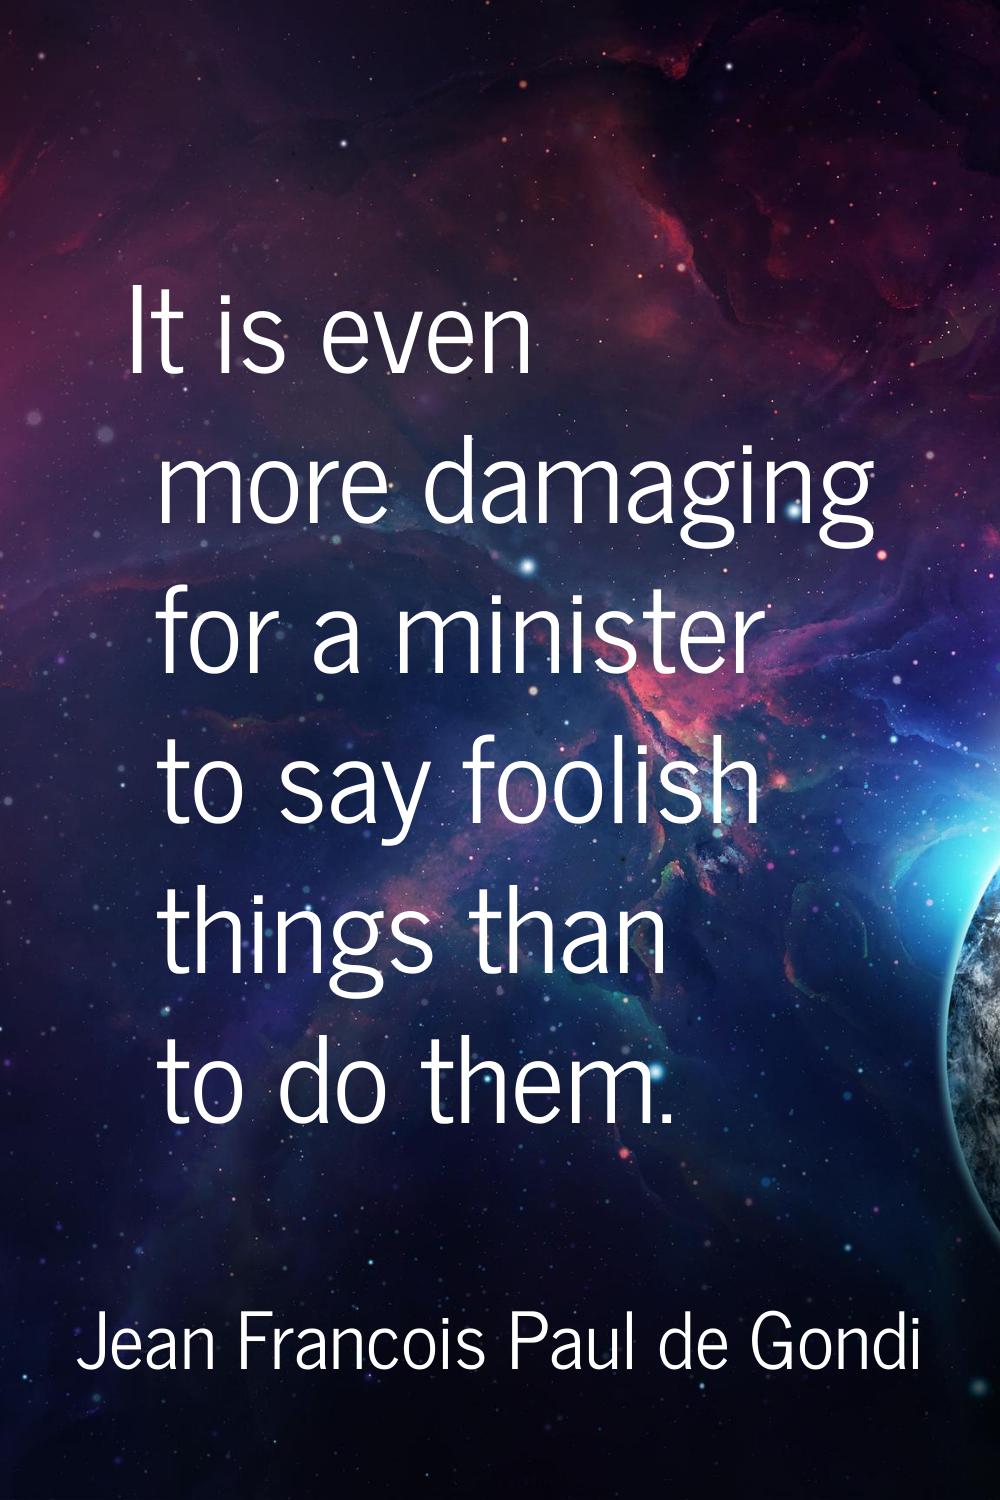 It is even more damaging for a minister to say foolish things than to do them.